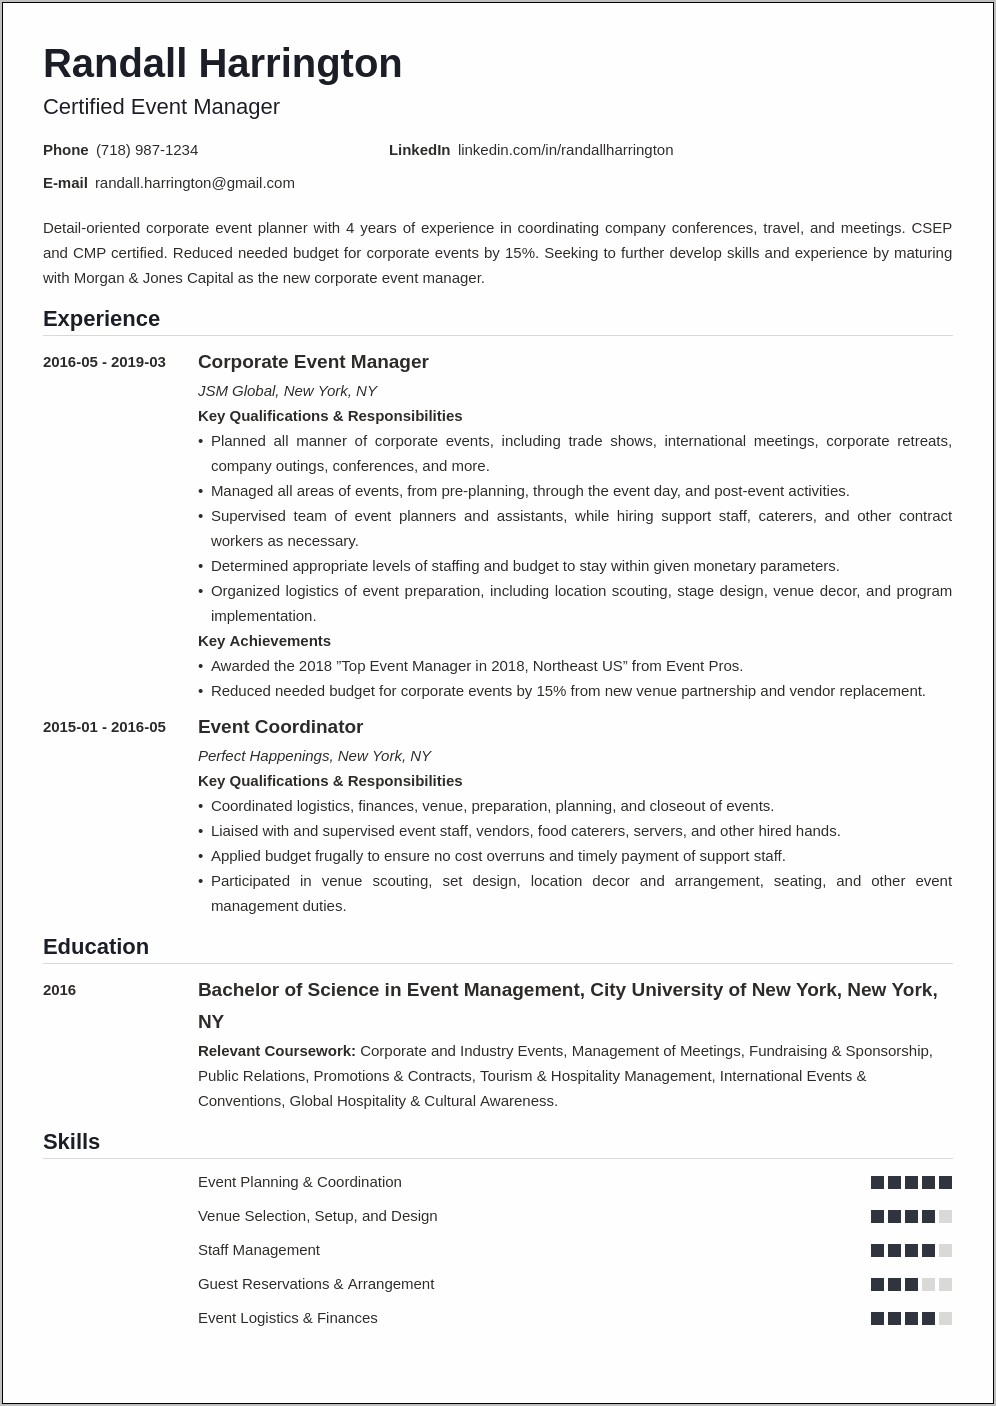 Resume Objective For Marketing And Events